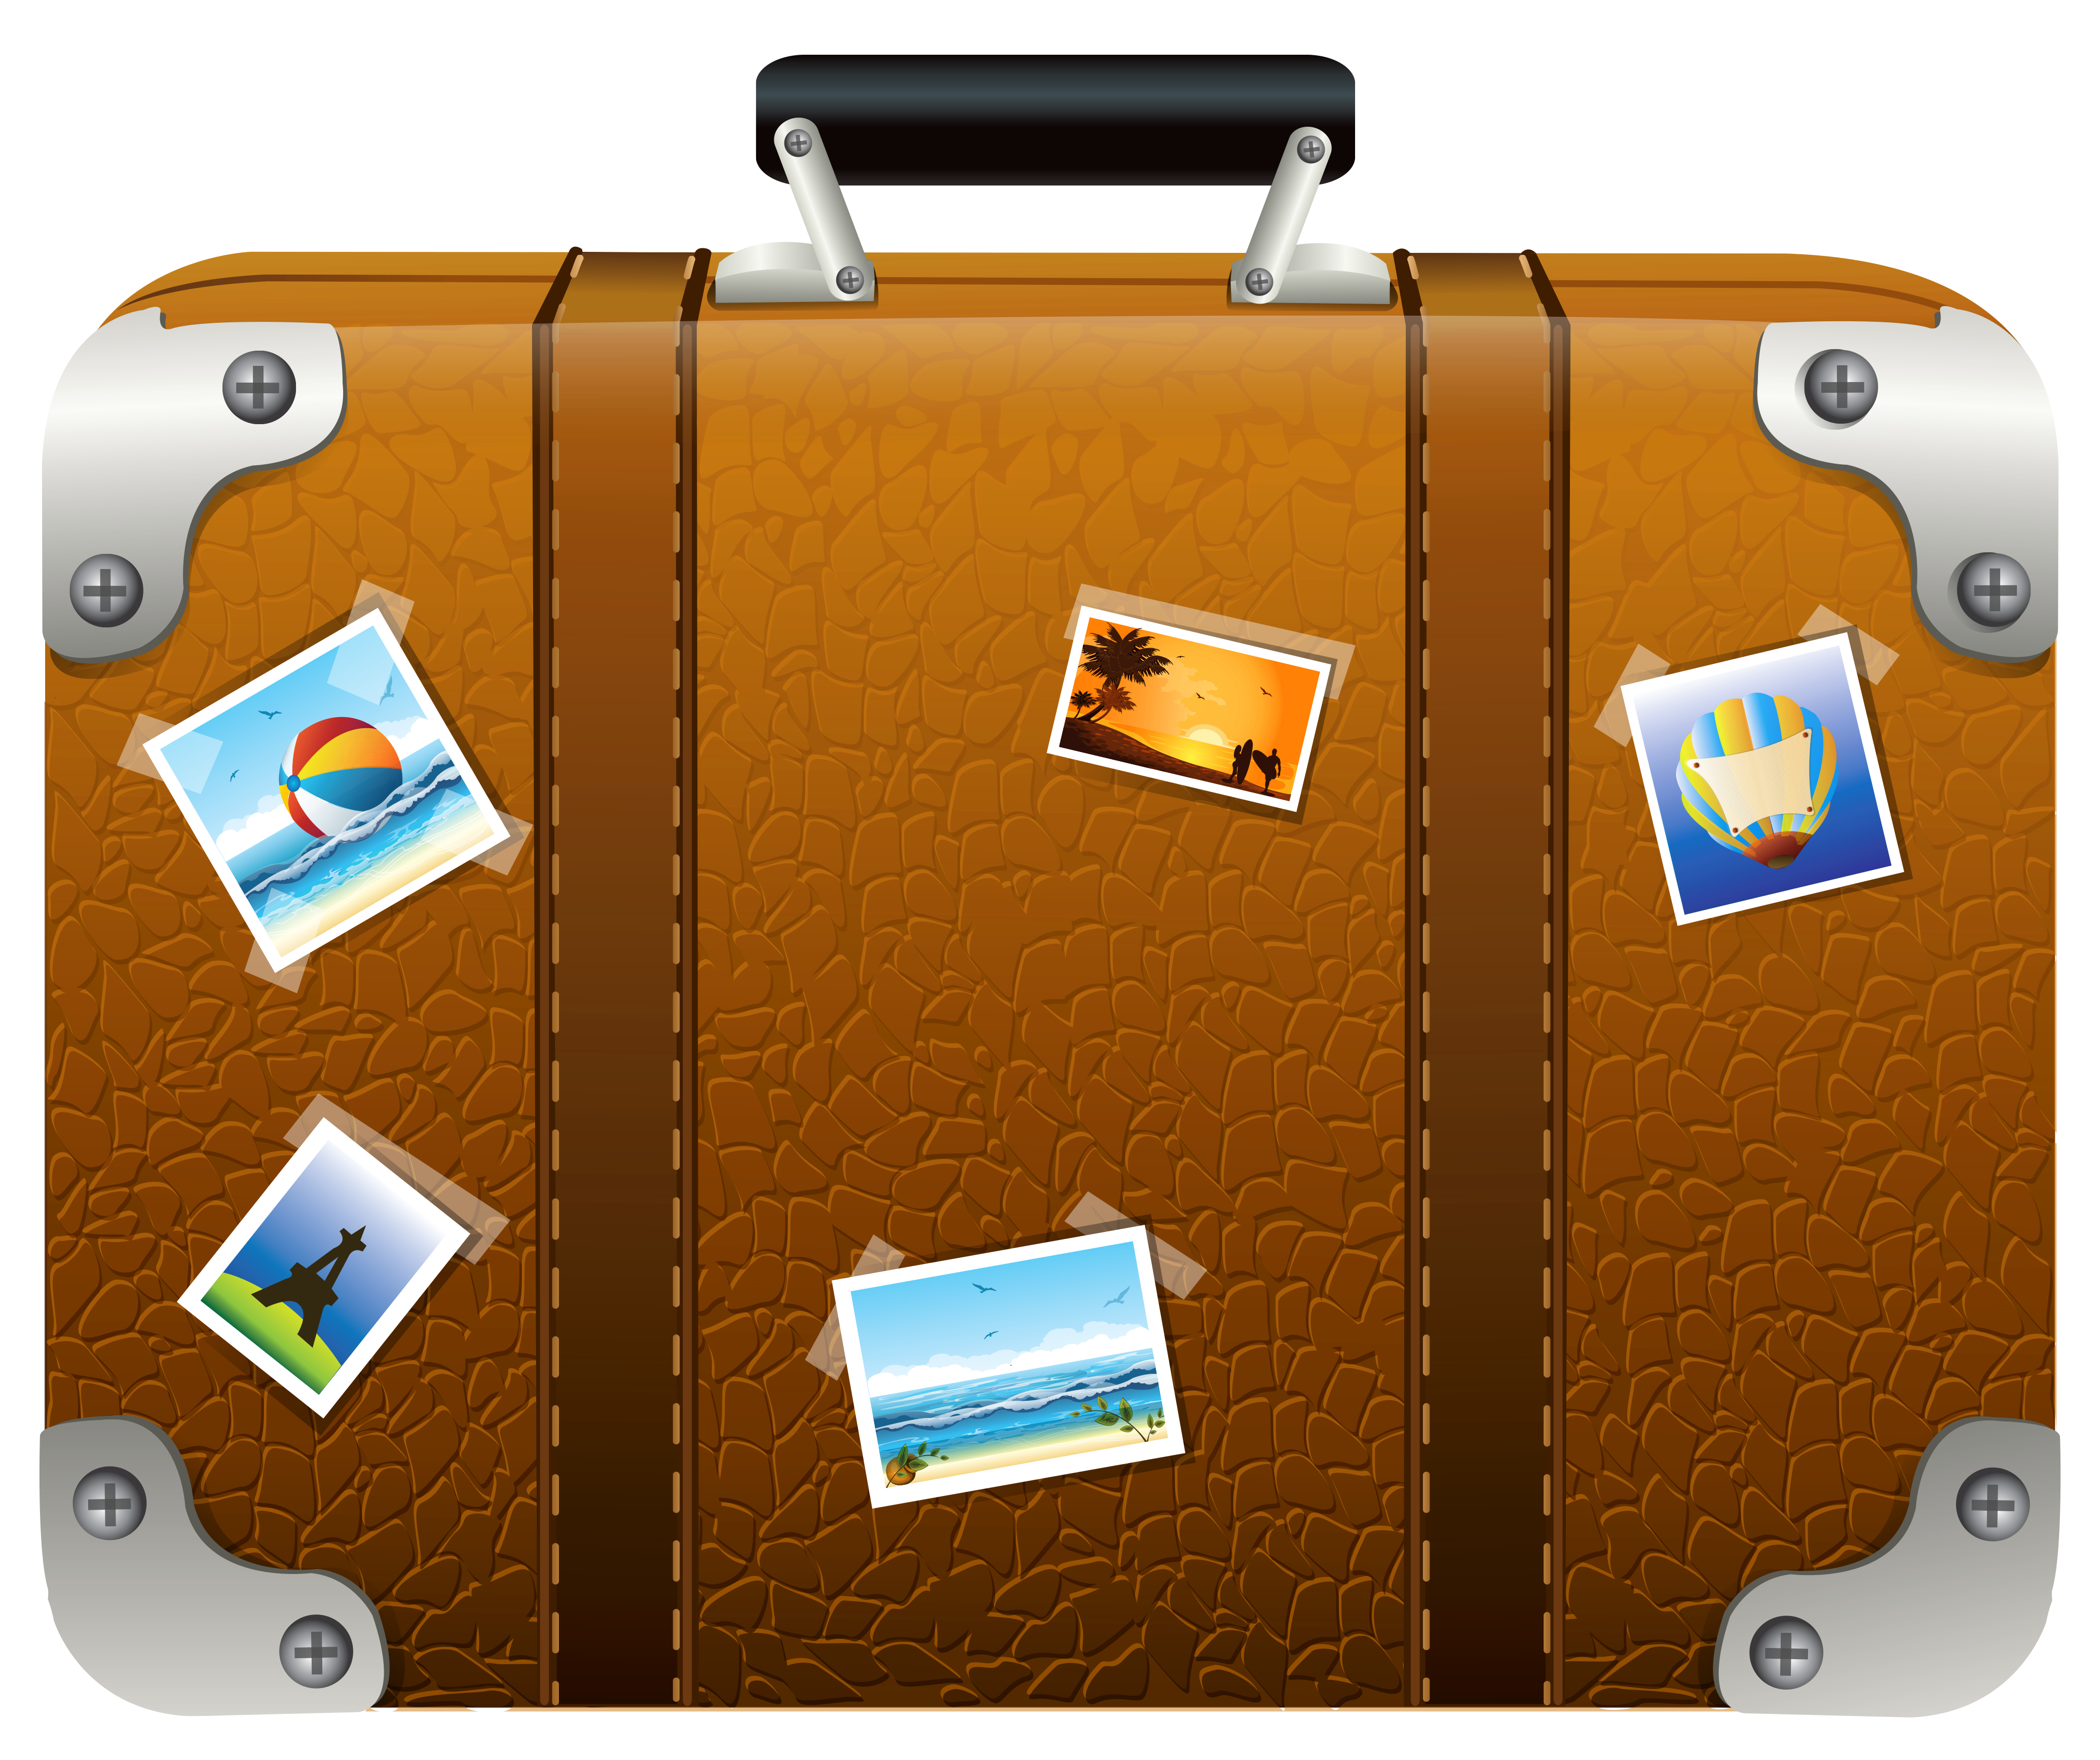 luggage clipart